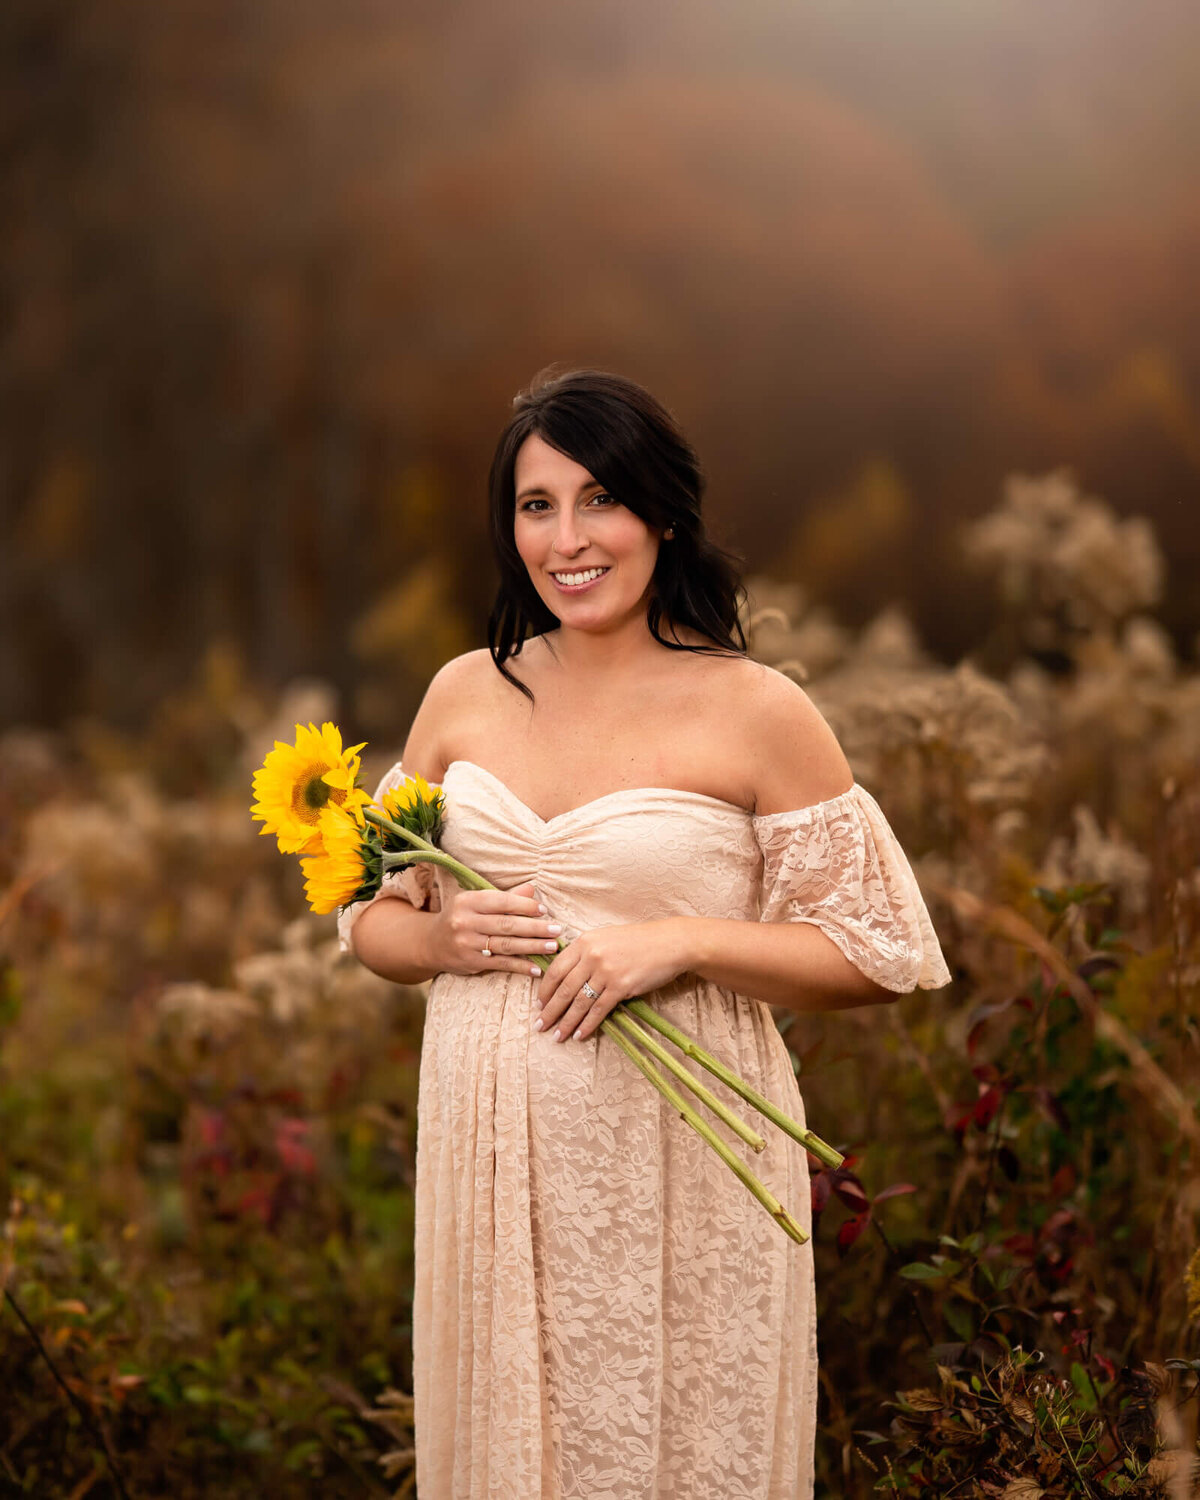 An expecting woman hold sunflowers across her belly while standing in front of tall grass